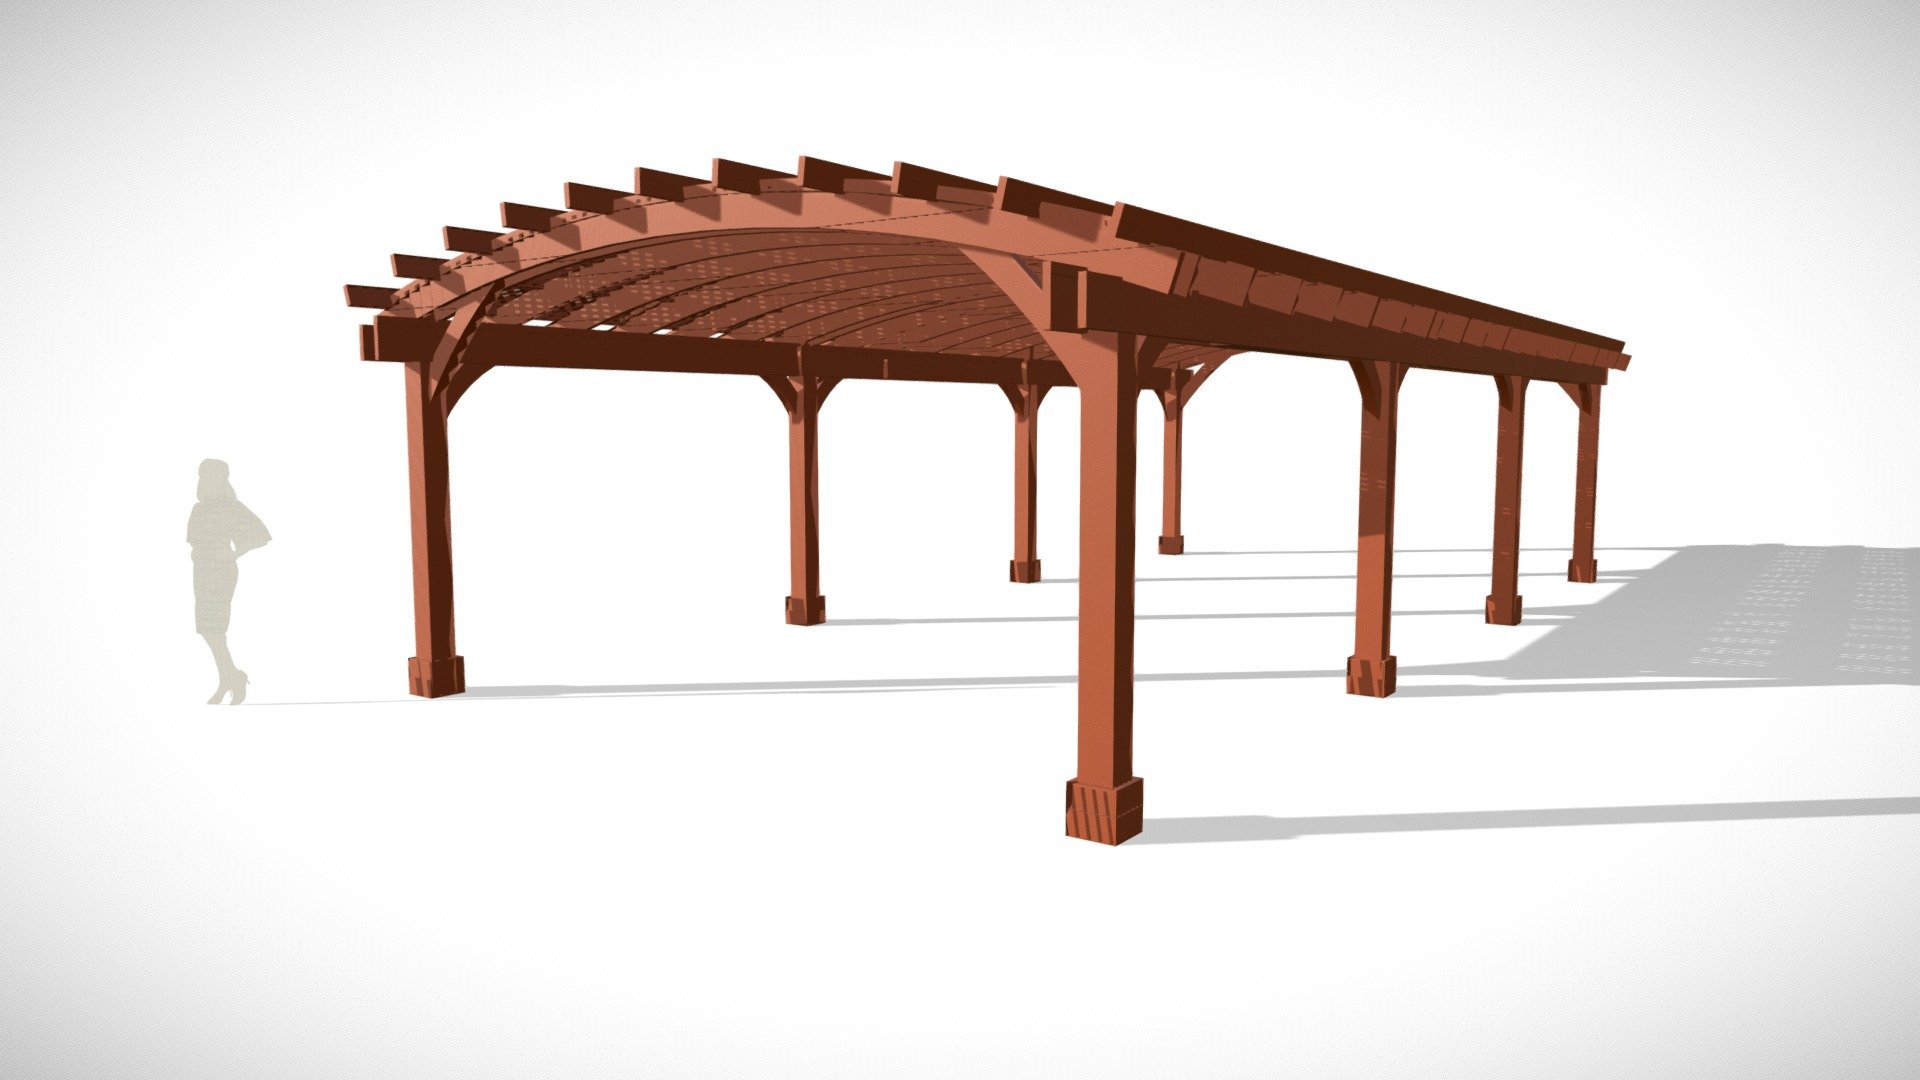 Arched Pergola Kit 40'L x 20'W
8x8 Posts

Drawn by Ivanna Garcia
7/8/2022

More like this at
https://www.foreverredwood.com/arched-pergola-kits.html?search=arched%20pergola - Arched Pergola Kit 40'L x 20'W - 3D model by Forever Redwood Engineering Team 3d model